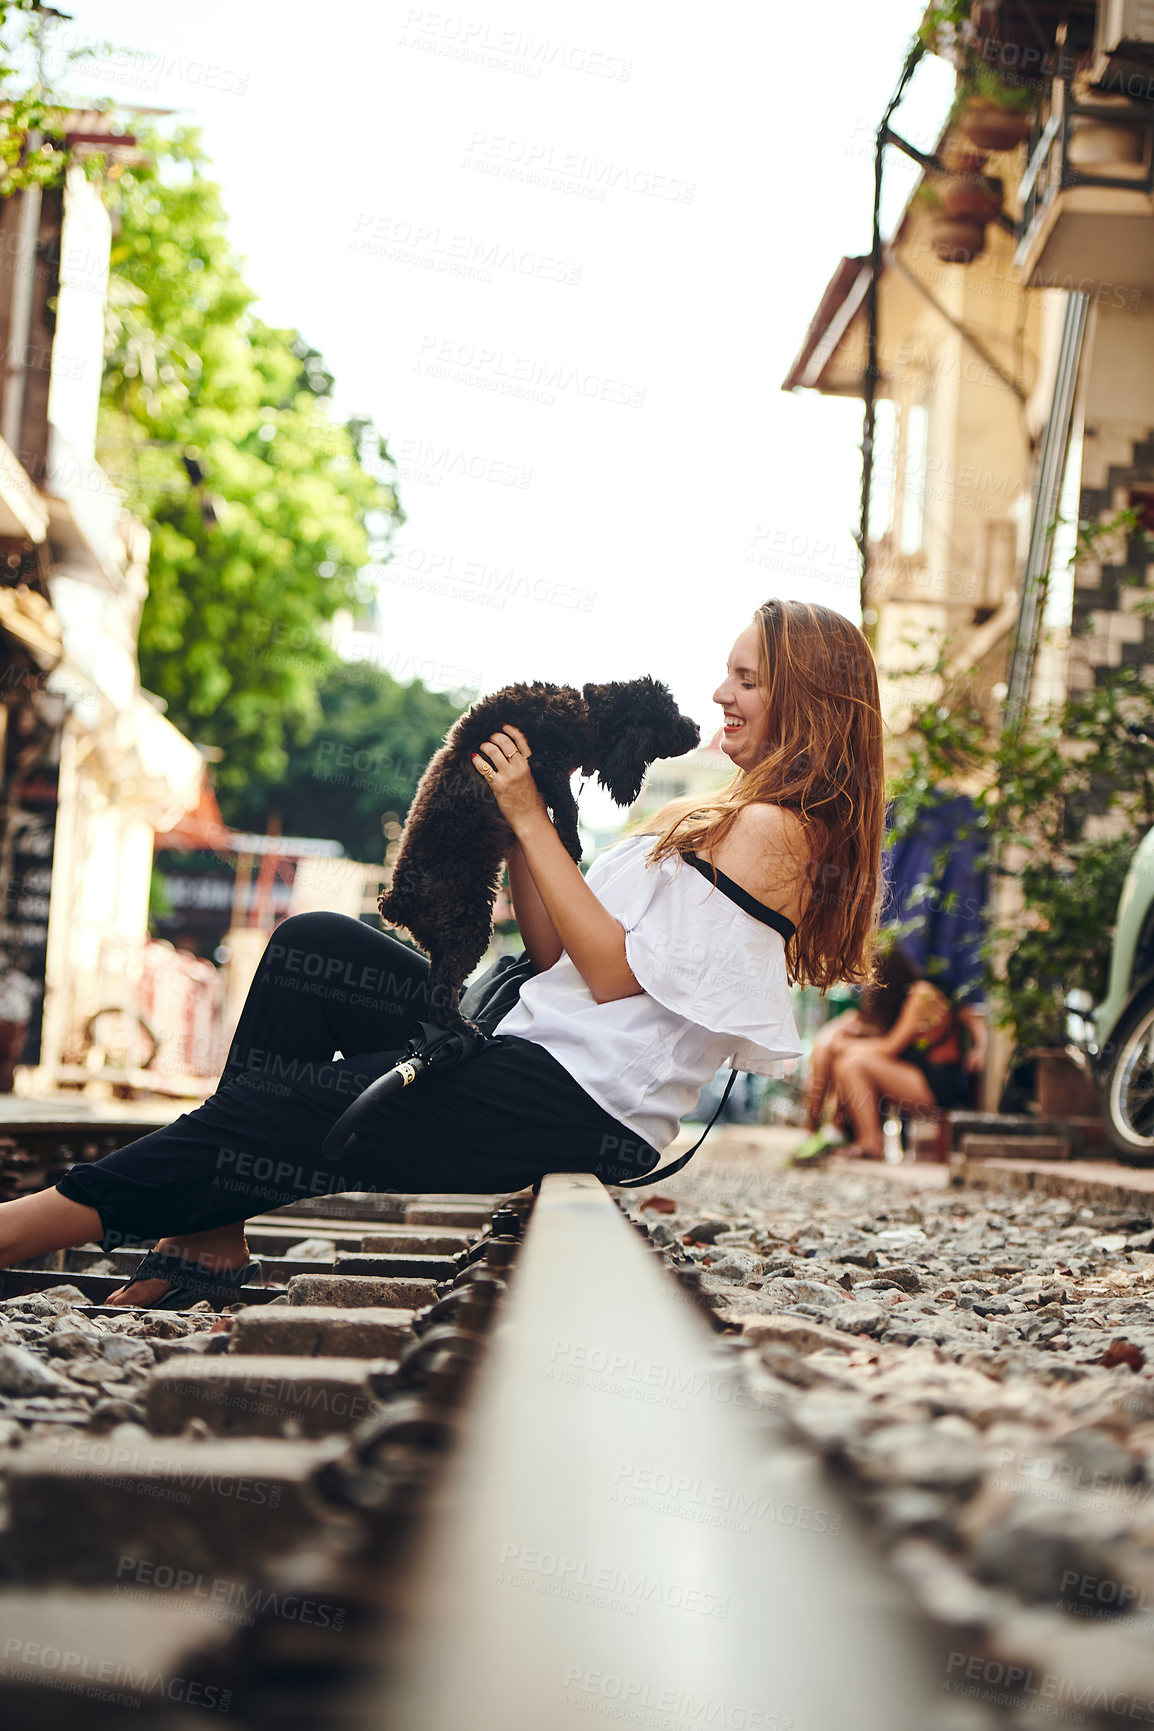 Buy stock photo Shot of a young woman playing with a dog while exploring a foreign city